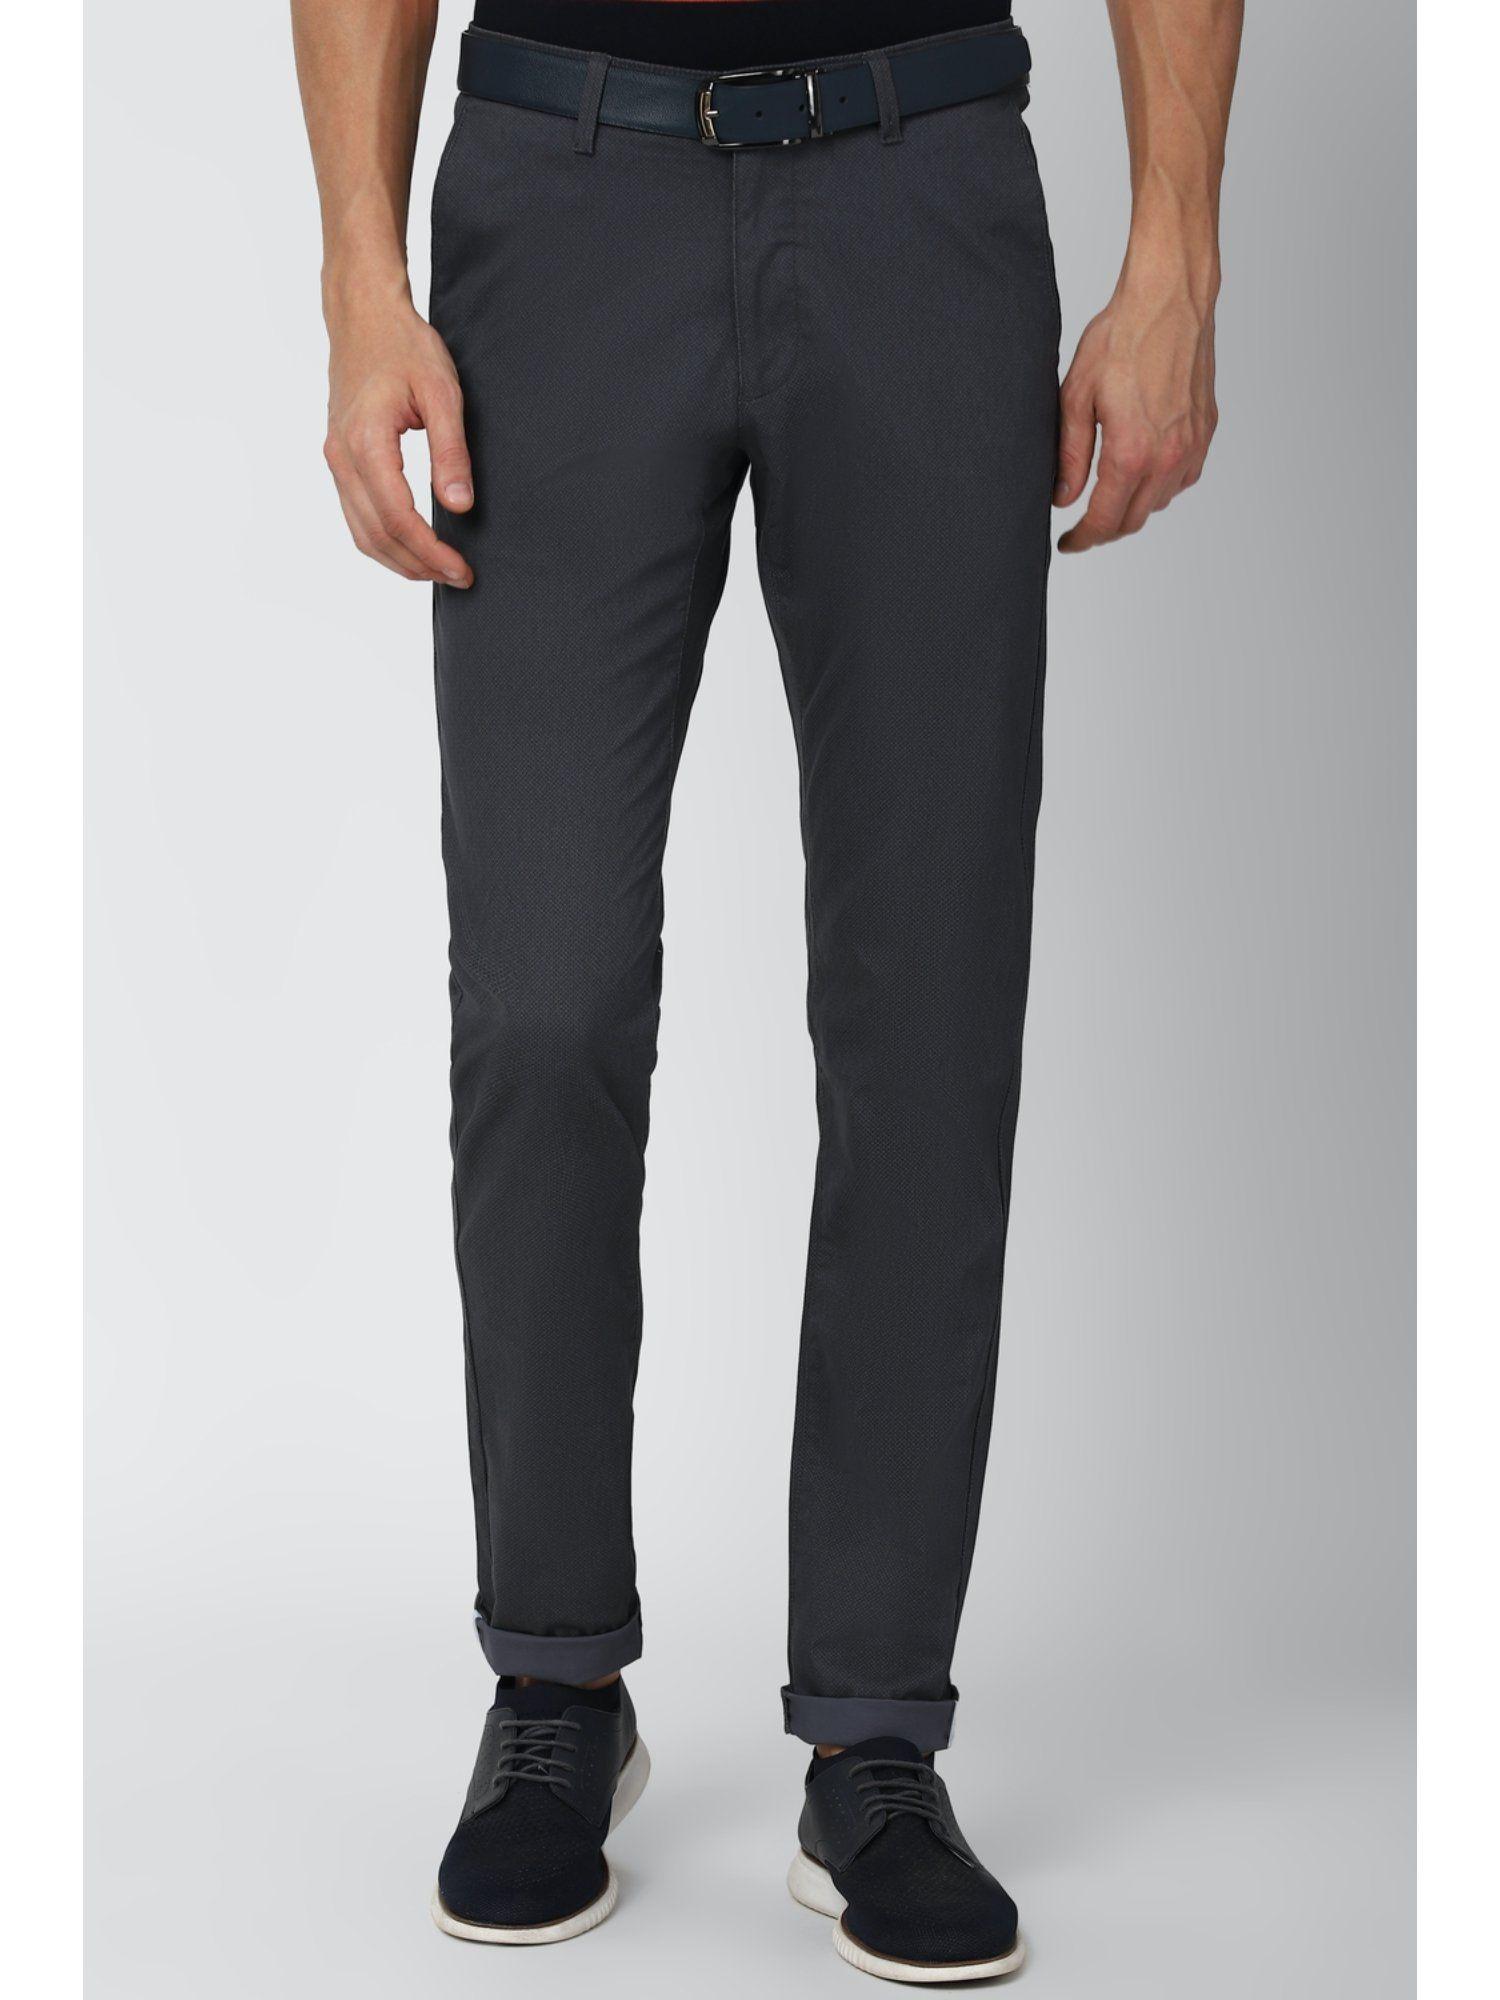 grey casual trouser